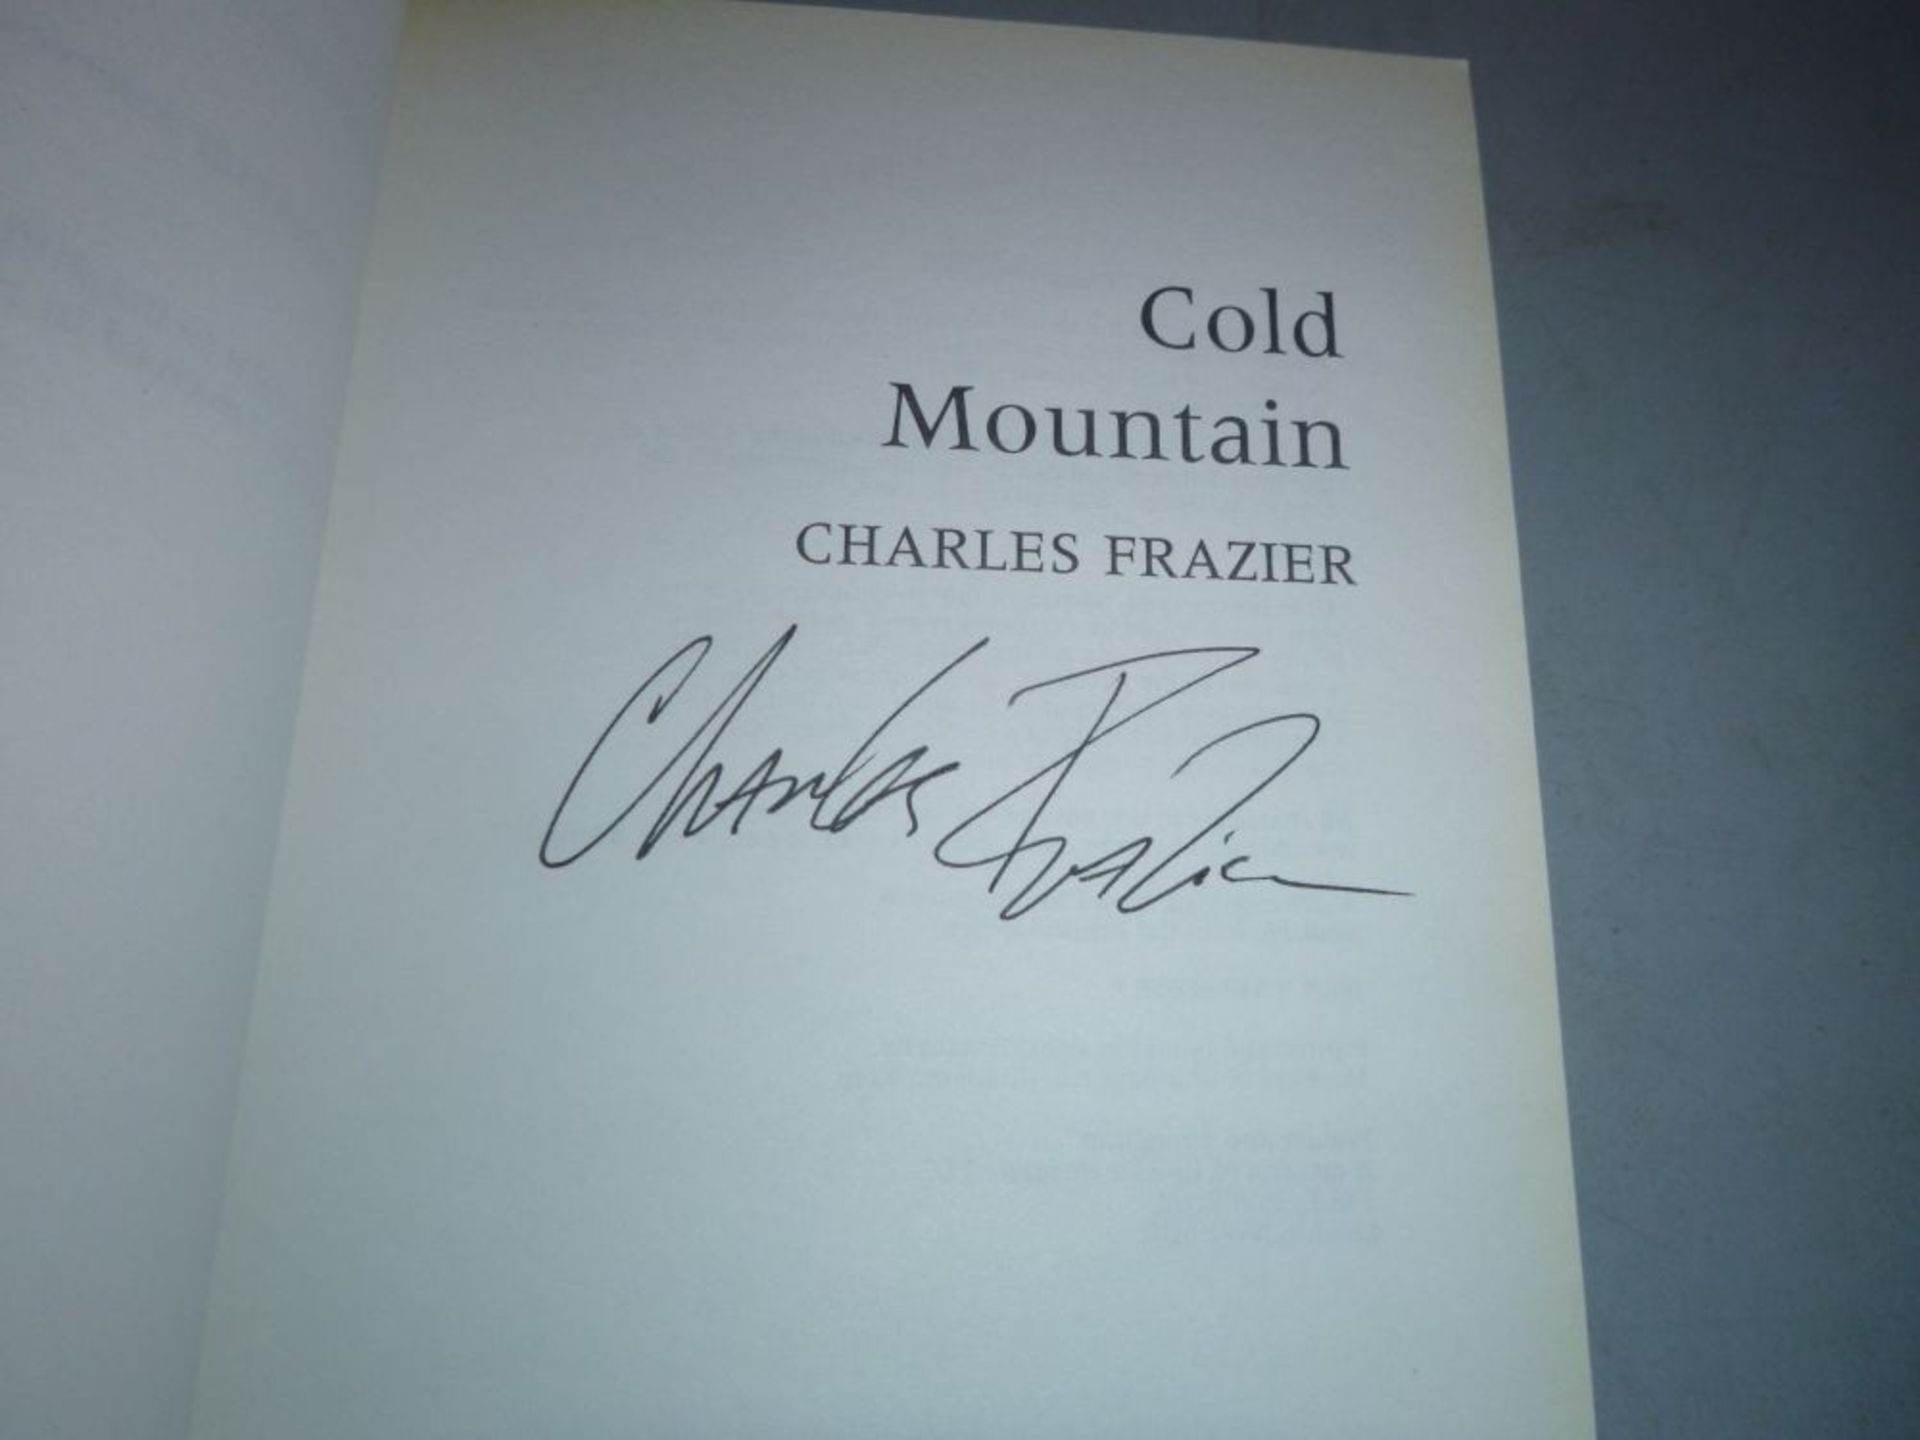 Large Collection of mostly 1st Edition Signed Books - Image 23 of 23